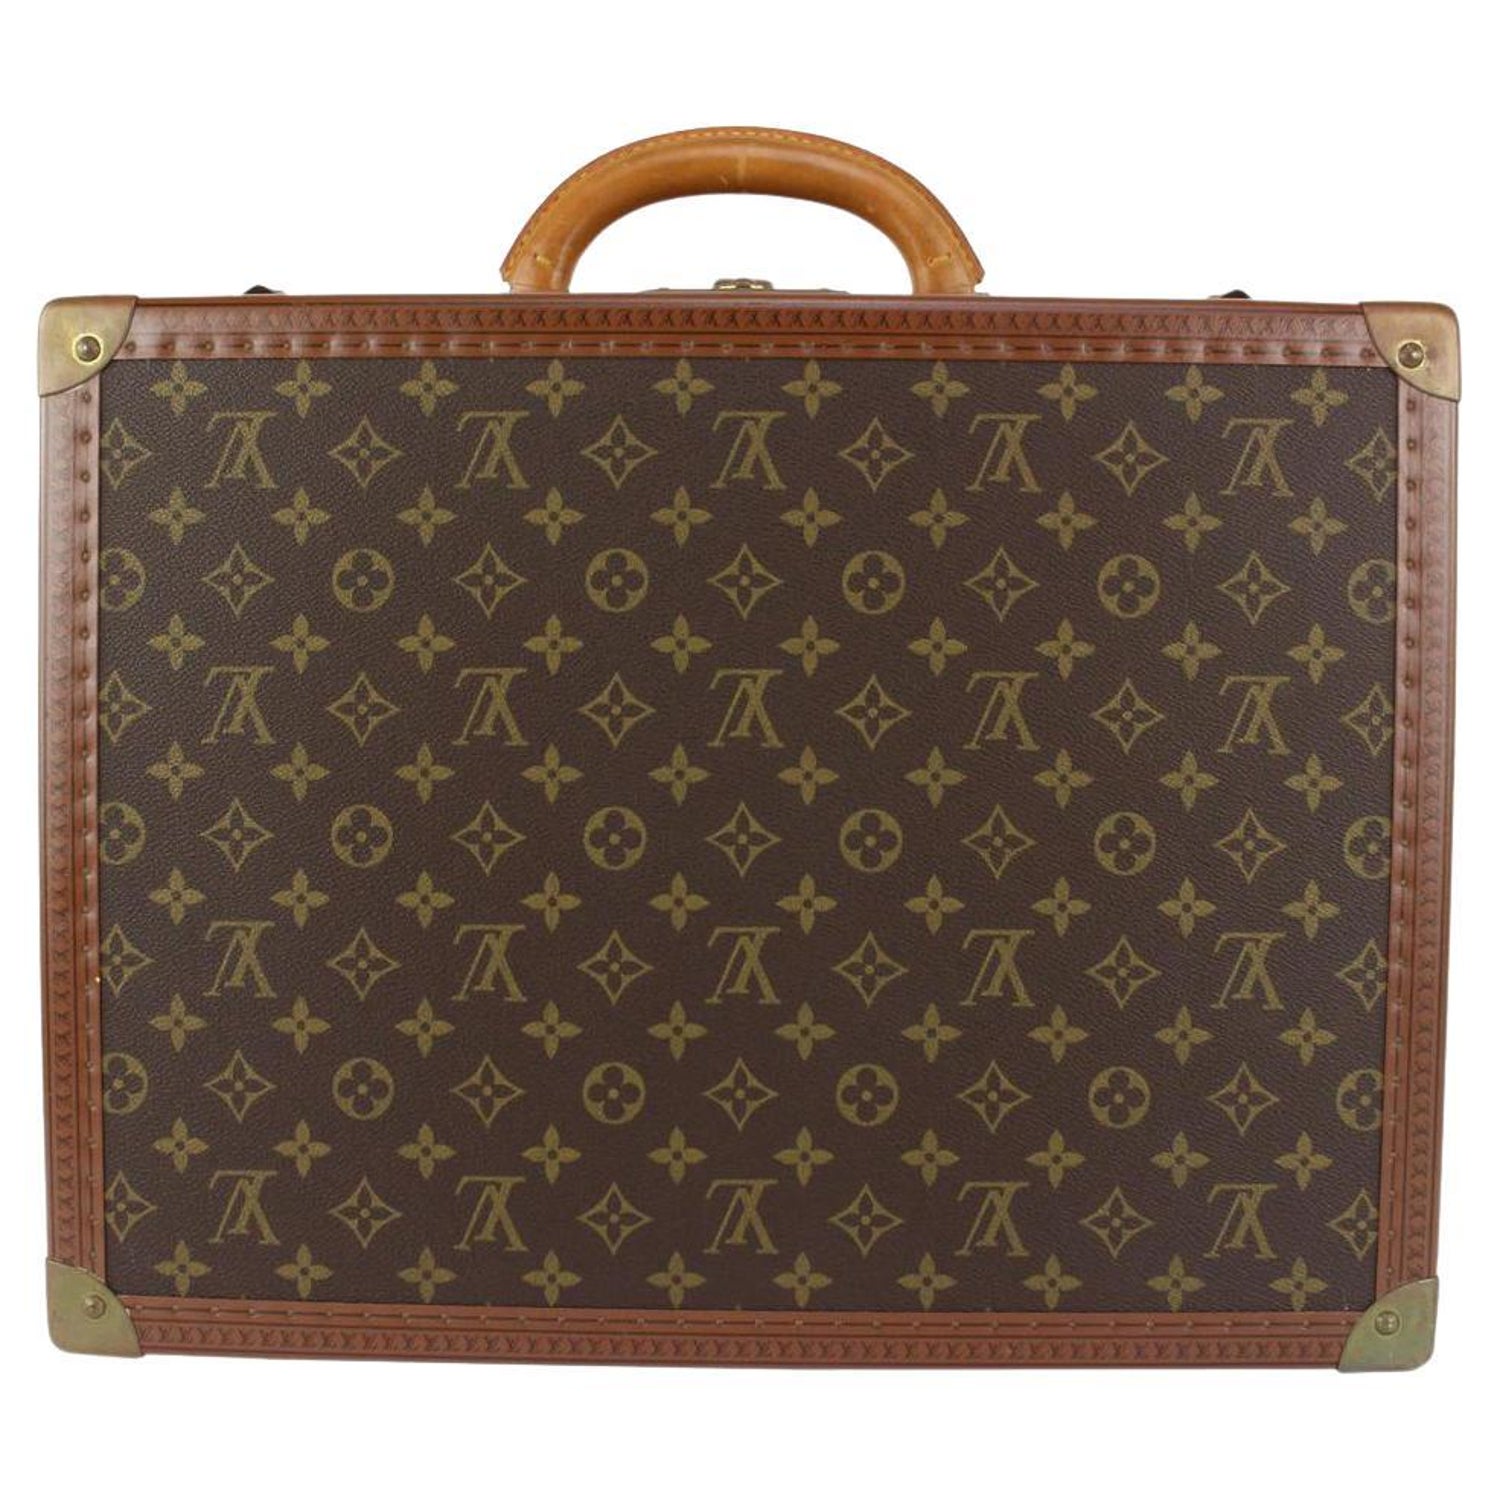 Why is Louis Vuitton so expensive? The Actual 5 Reasons - Luxe Front